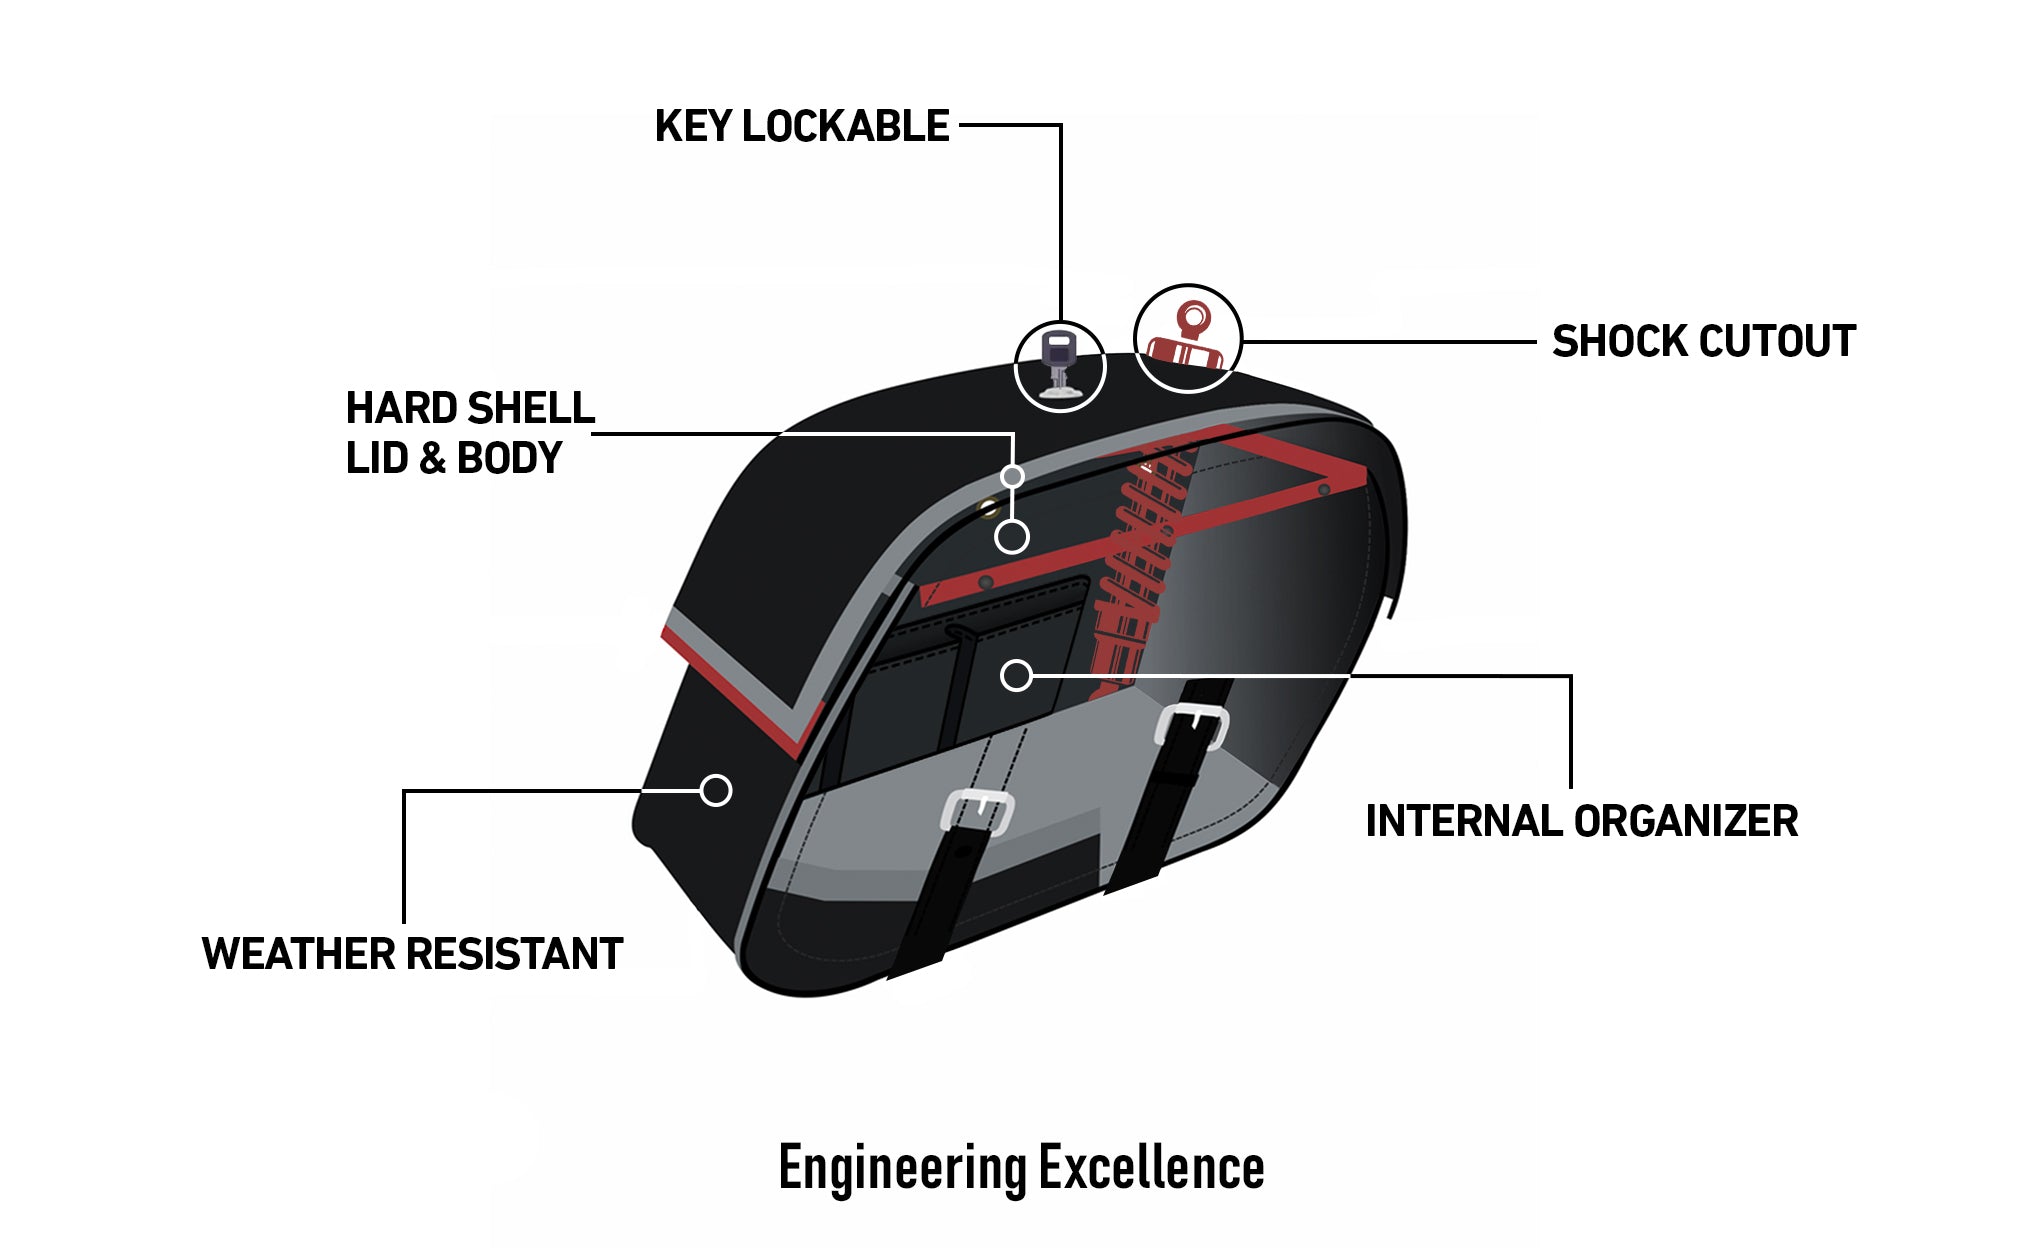 Viking Raven Extra Large Shock Cut Out Leather Motorcycle Saddlebags For Harley Dyna Wide Glide Fxdwg I Engineering Excellence with Bag on Bike @expand